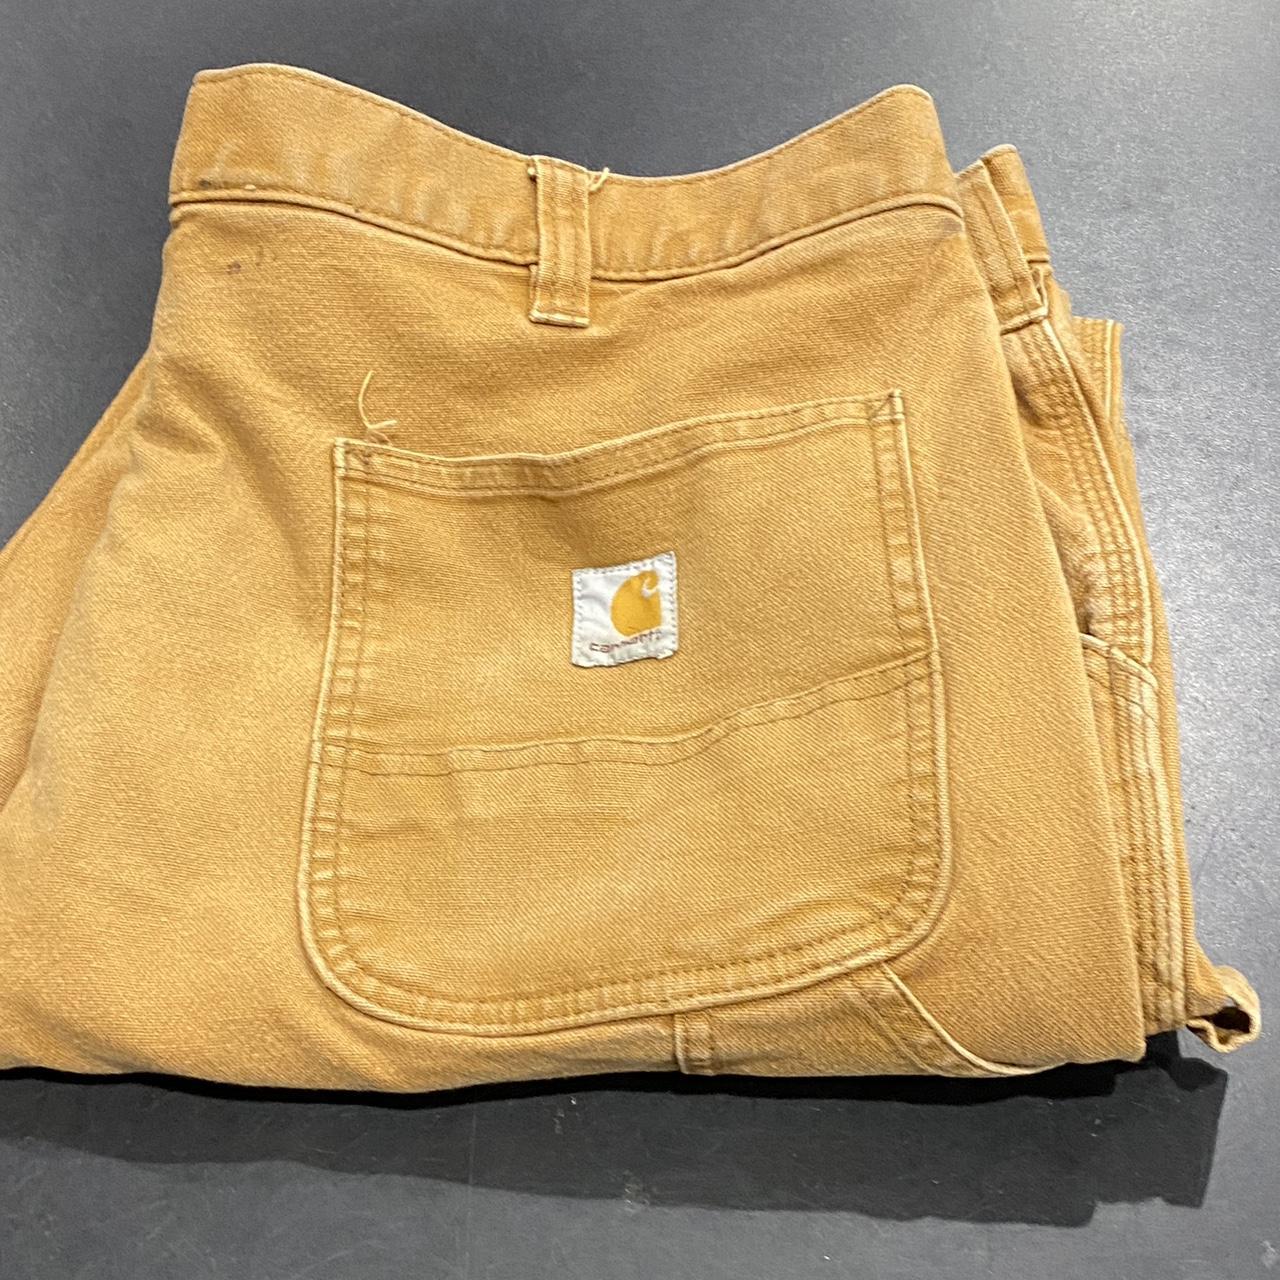 Carhartt pants relaxed fit 40 x 32 $20 OBO... - Depop